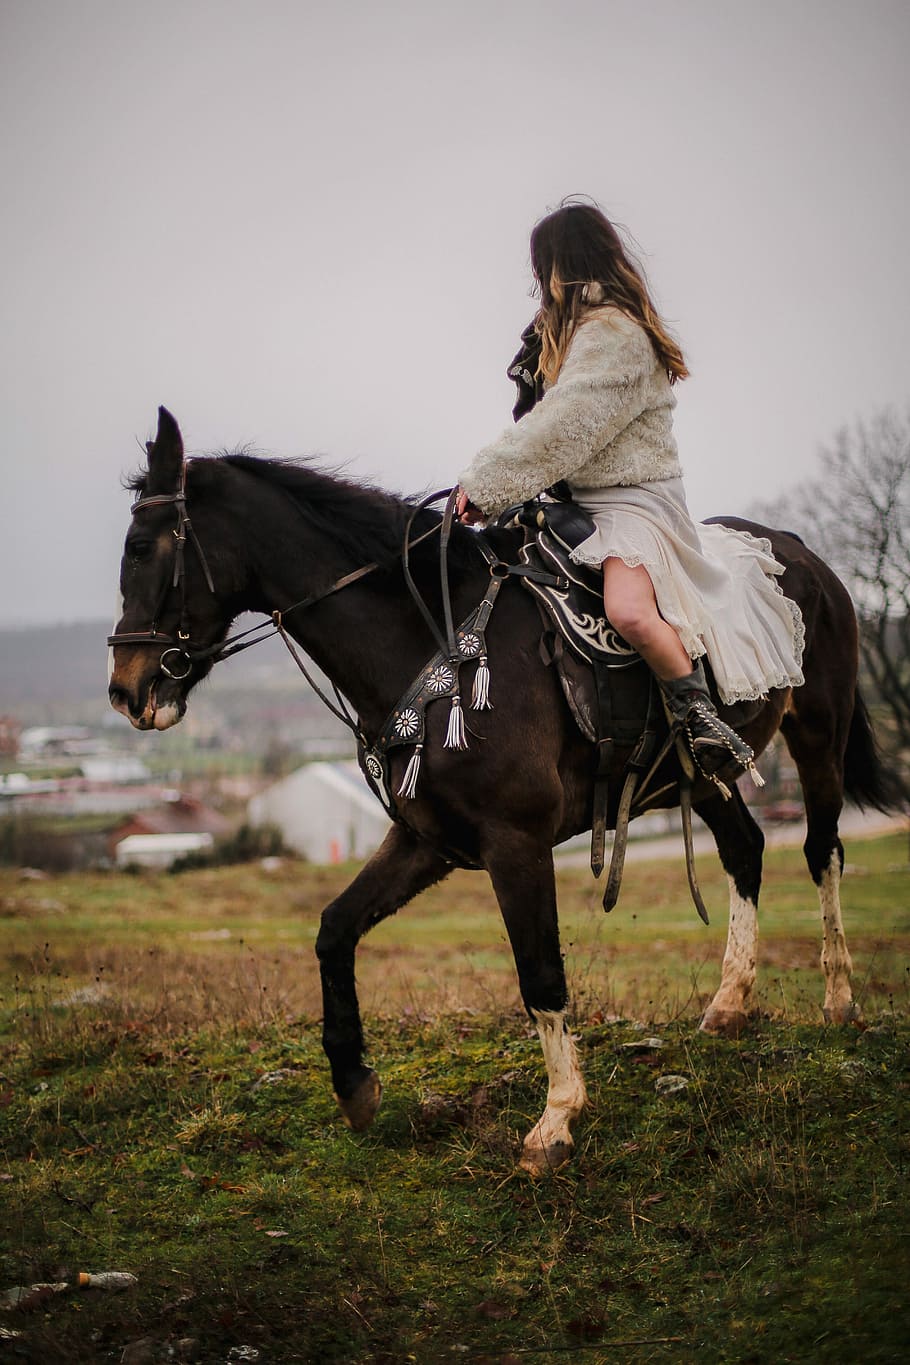 A woman in a white dress rides a black horse in a field. - Horse